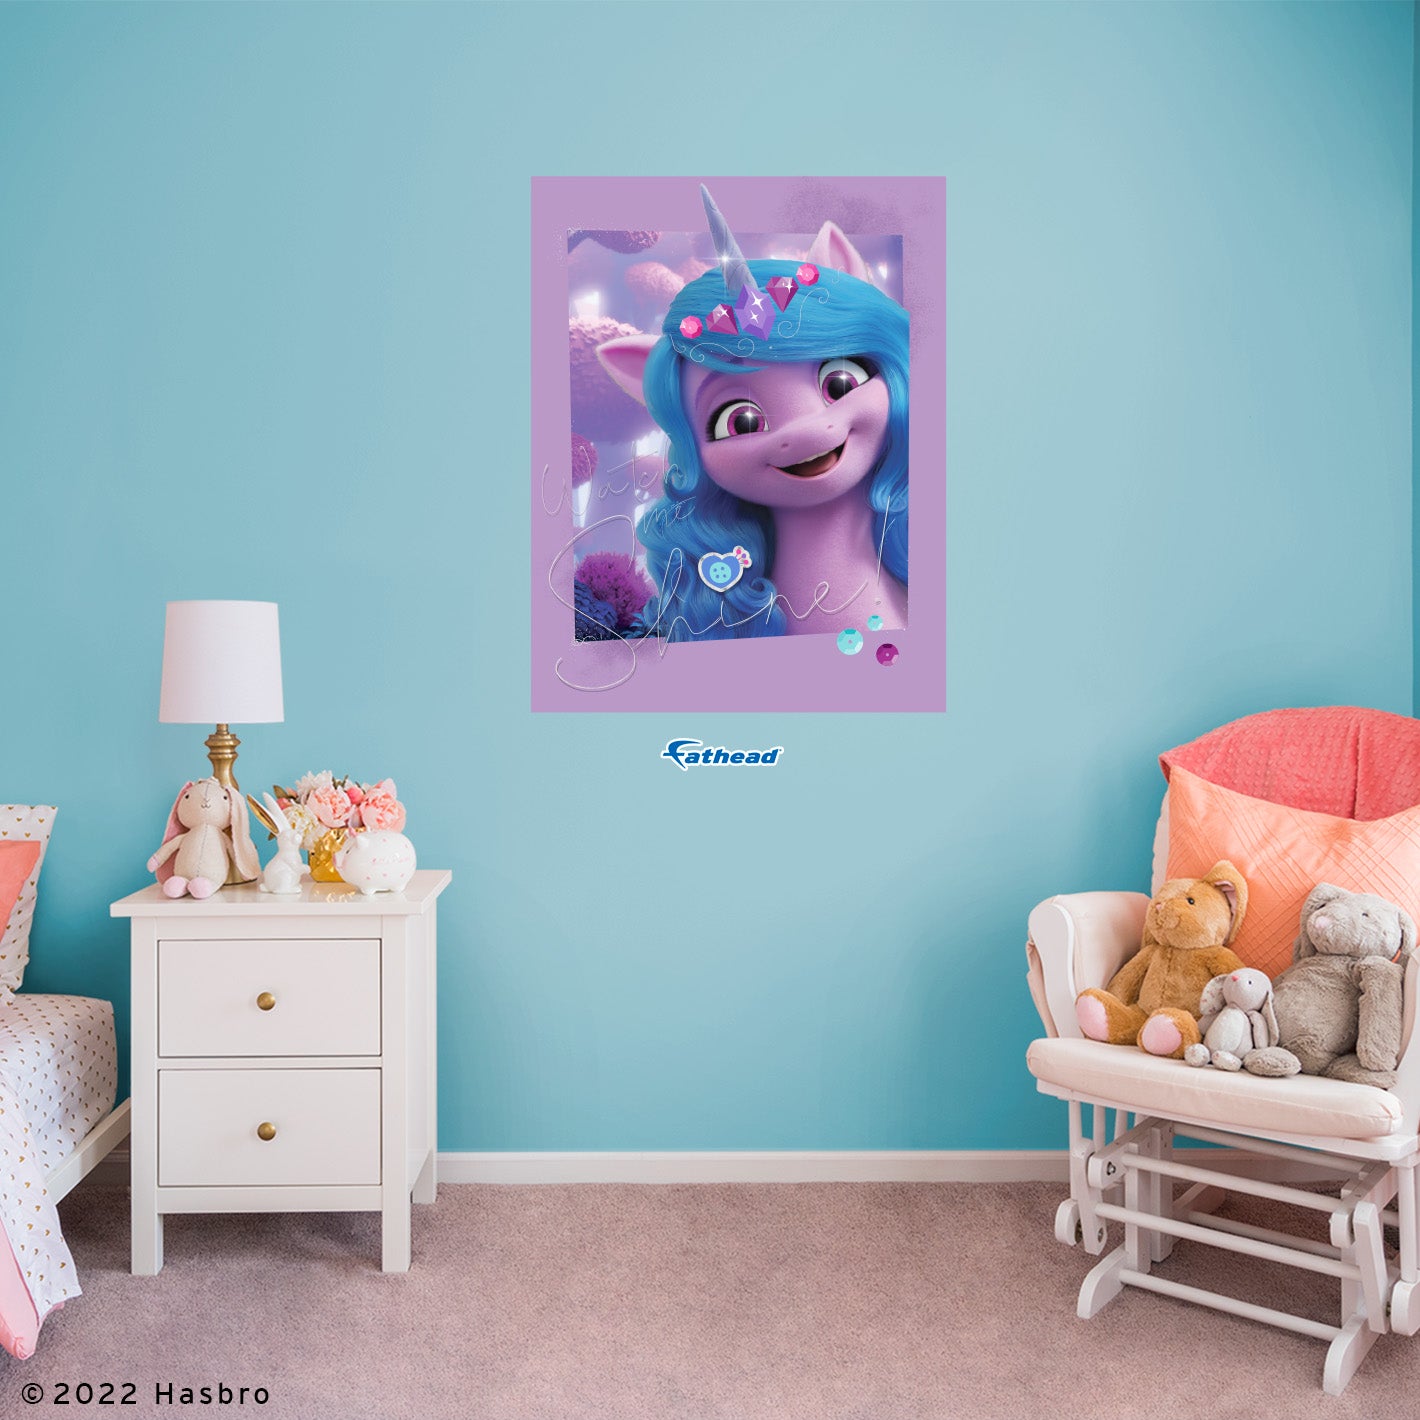 My Little Pony Movie 2: Watch Me Shine Poster - Officially Licensed Hasbro Removable Adhesive Decal